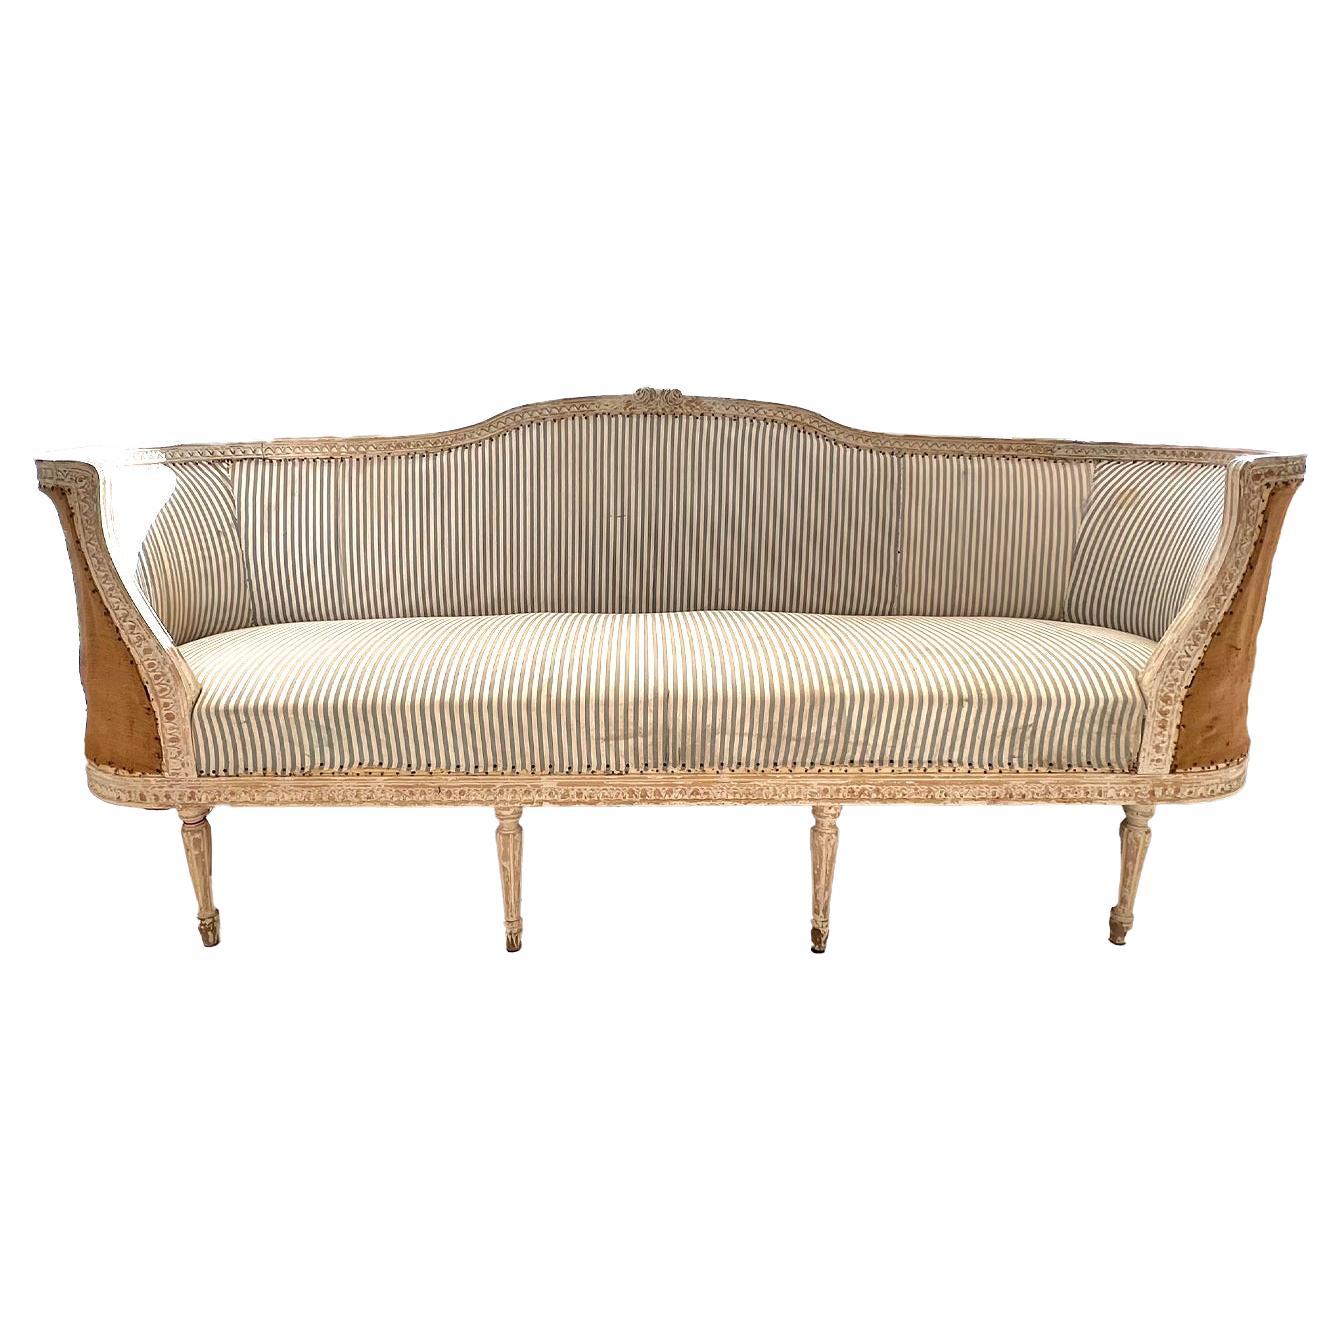 Beautiful curves, long and narrow for limited space like a hallway if necessary. The ends of this Swedish tub sofa curve comfortably around creating a welcoming and cozy feel. Stretching a little over 8 feet in length there is plenty of seating room